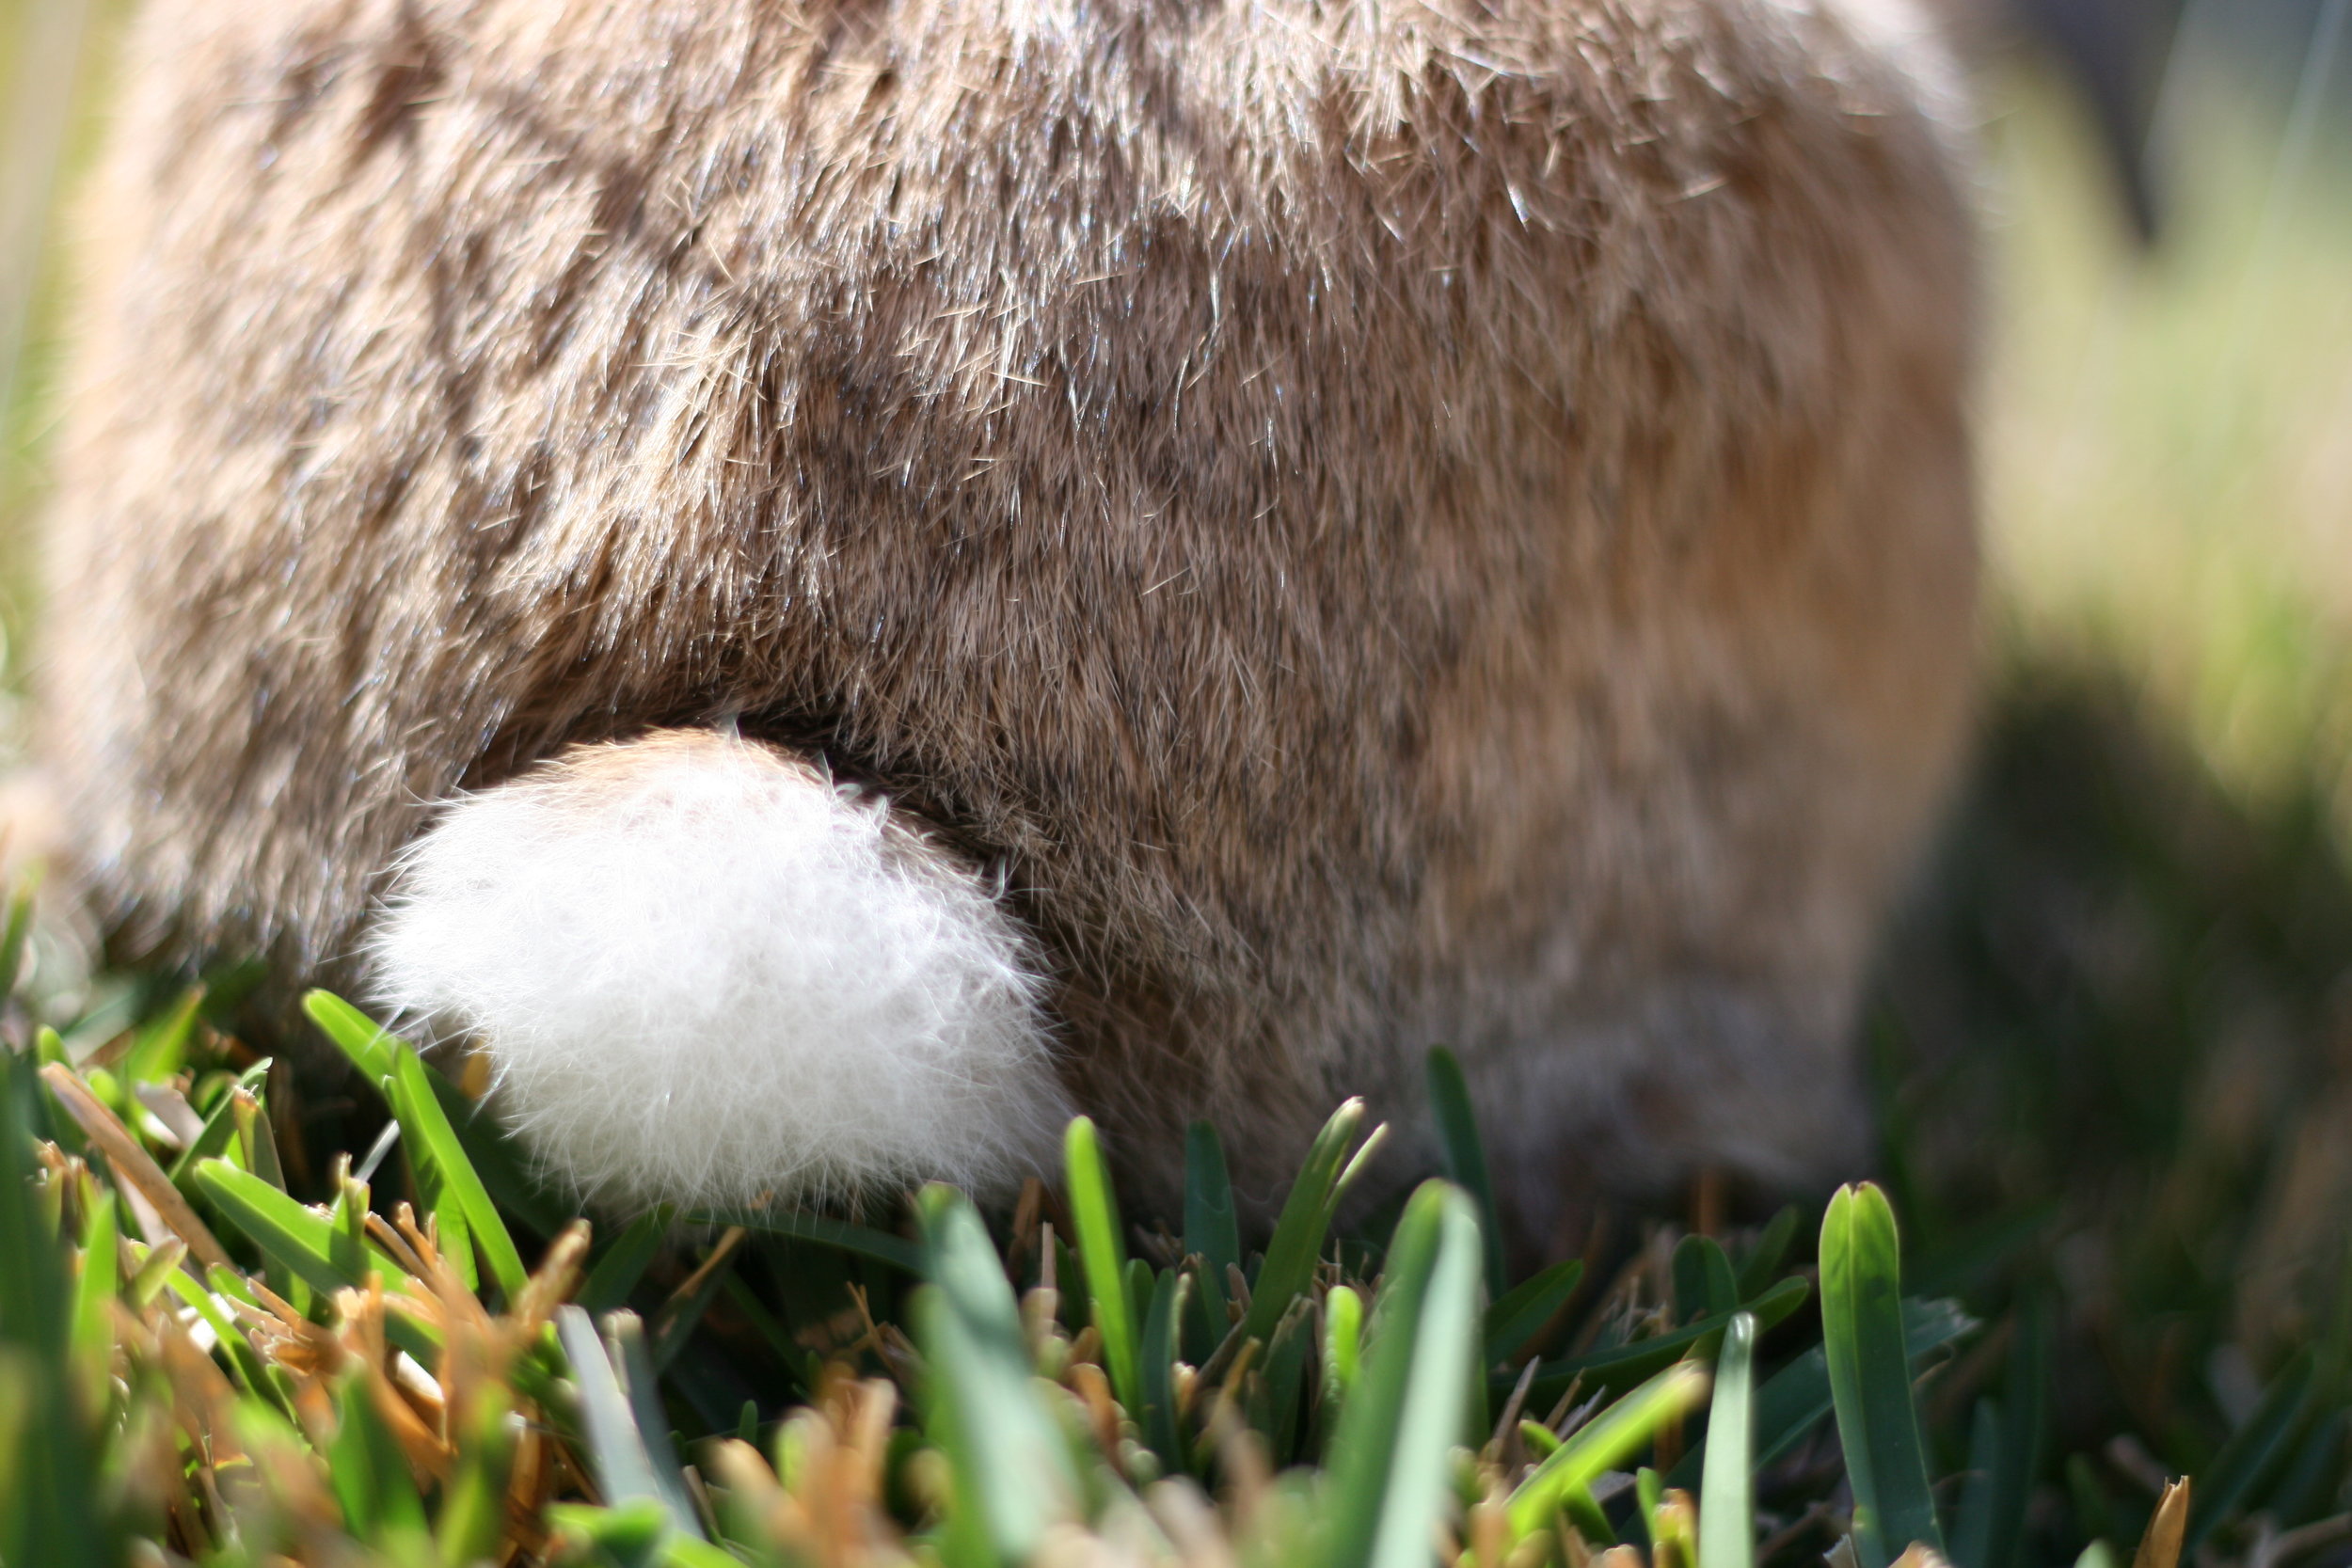 Bunny Soaks Up the Sun Outside on the Grass 4